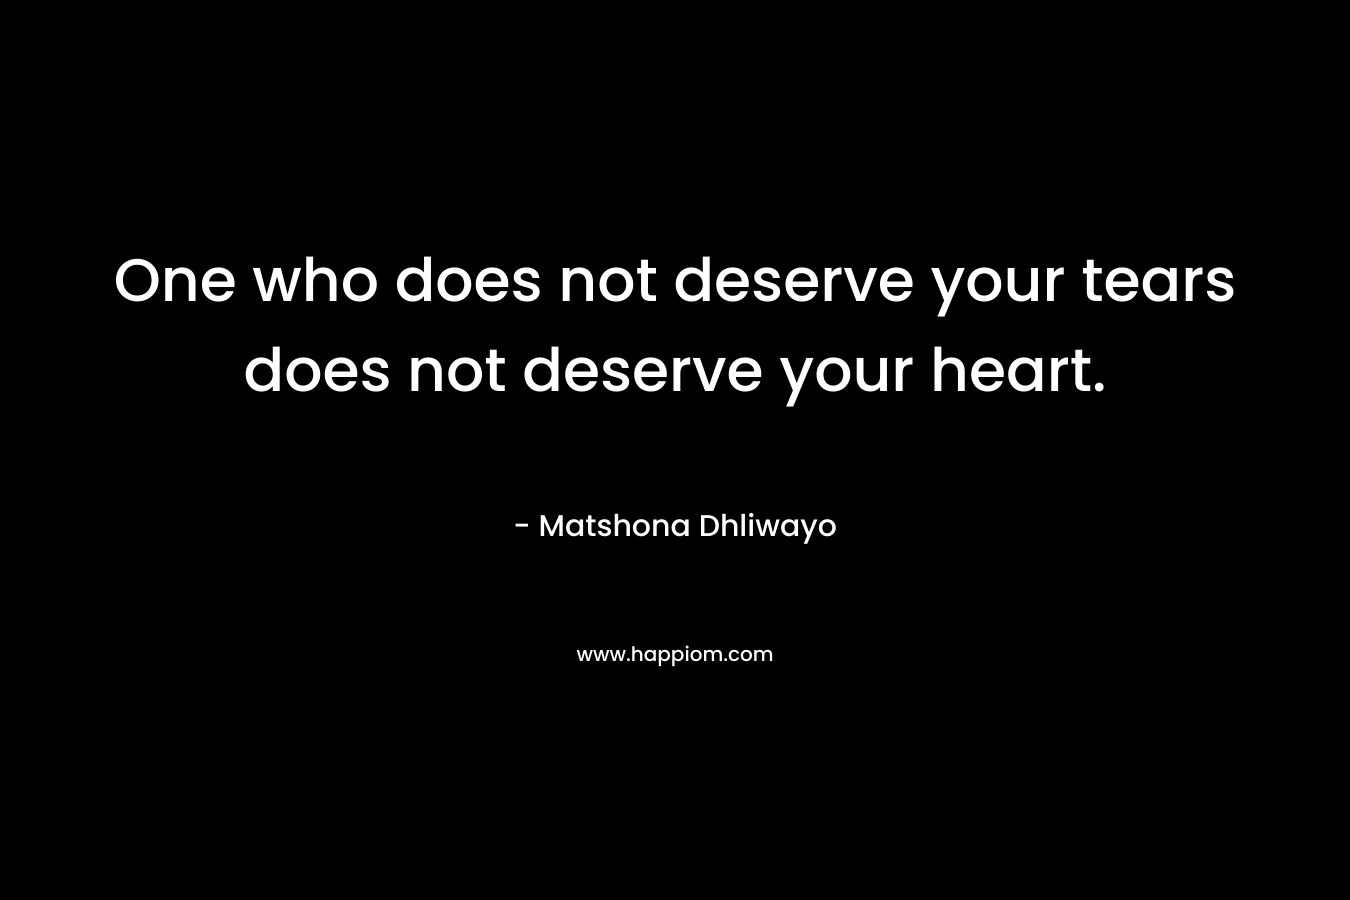 One who does not deserve your tears does not deserve your heart.